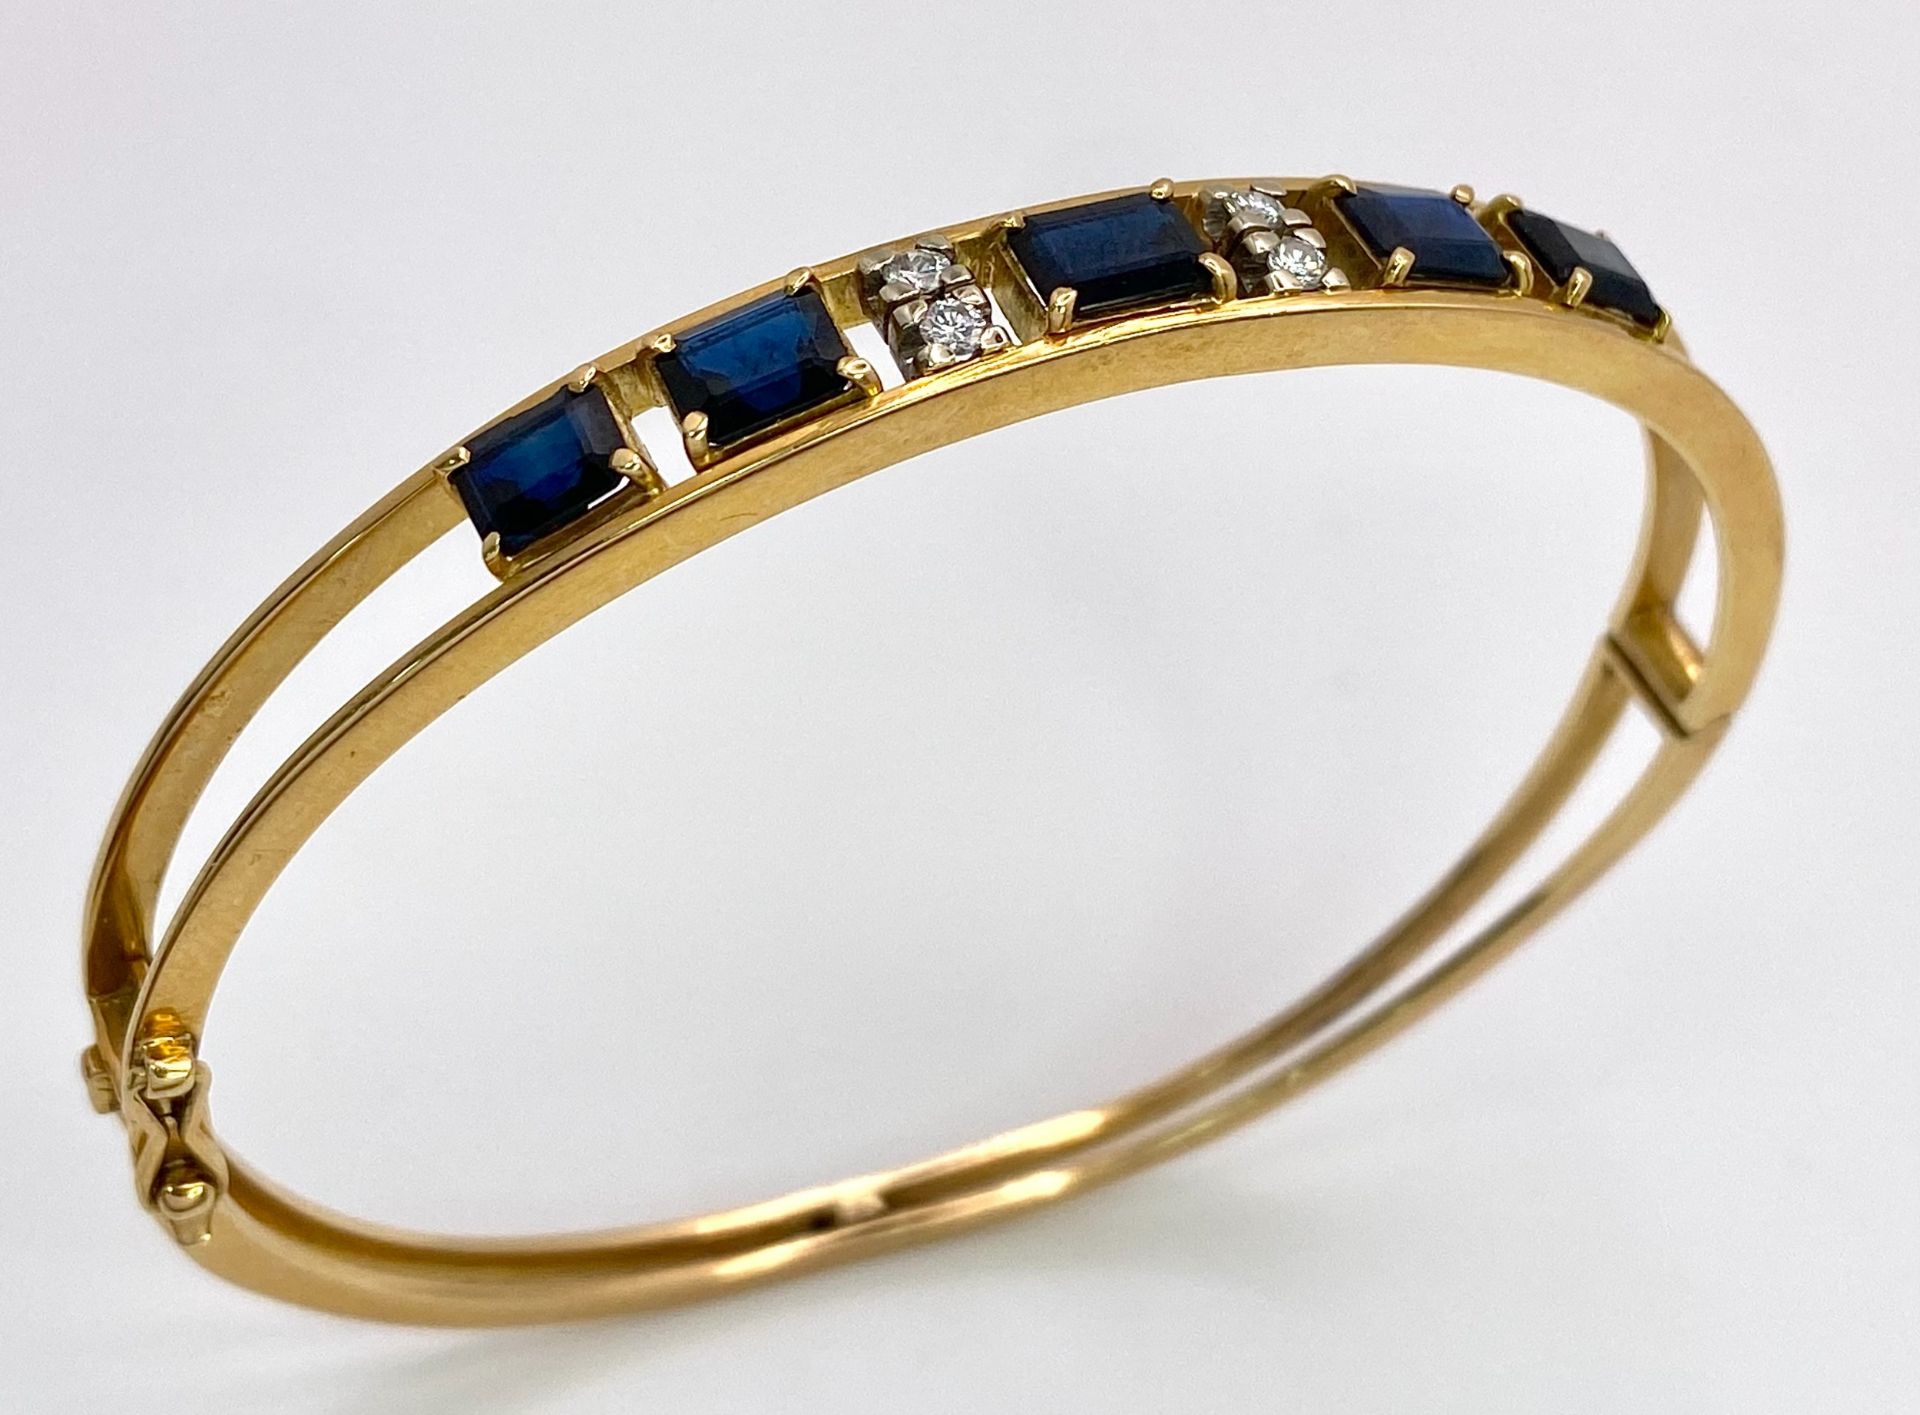 A 14K (TESTED AS) YELLOW GOLD BANGLE SET WITH 5 SAPPHIRES AND 4 DIAMONDS, 6CM DIAMETER, 15.9G (DIA: - Image 6 of 6